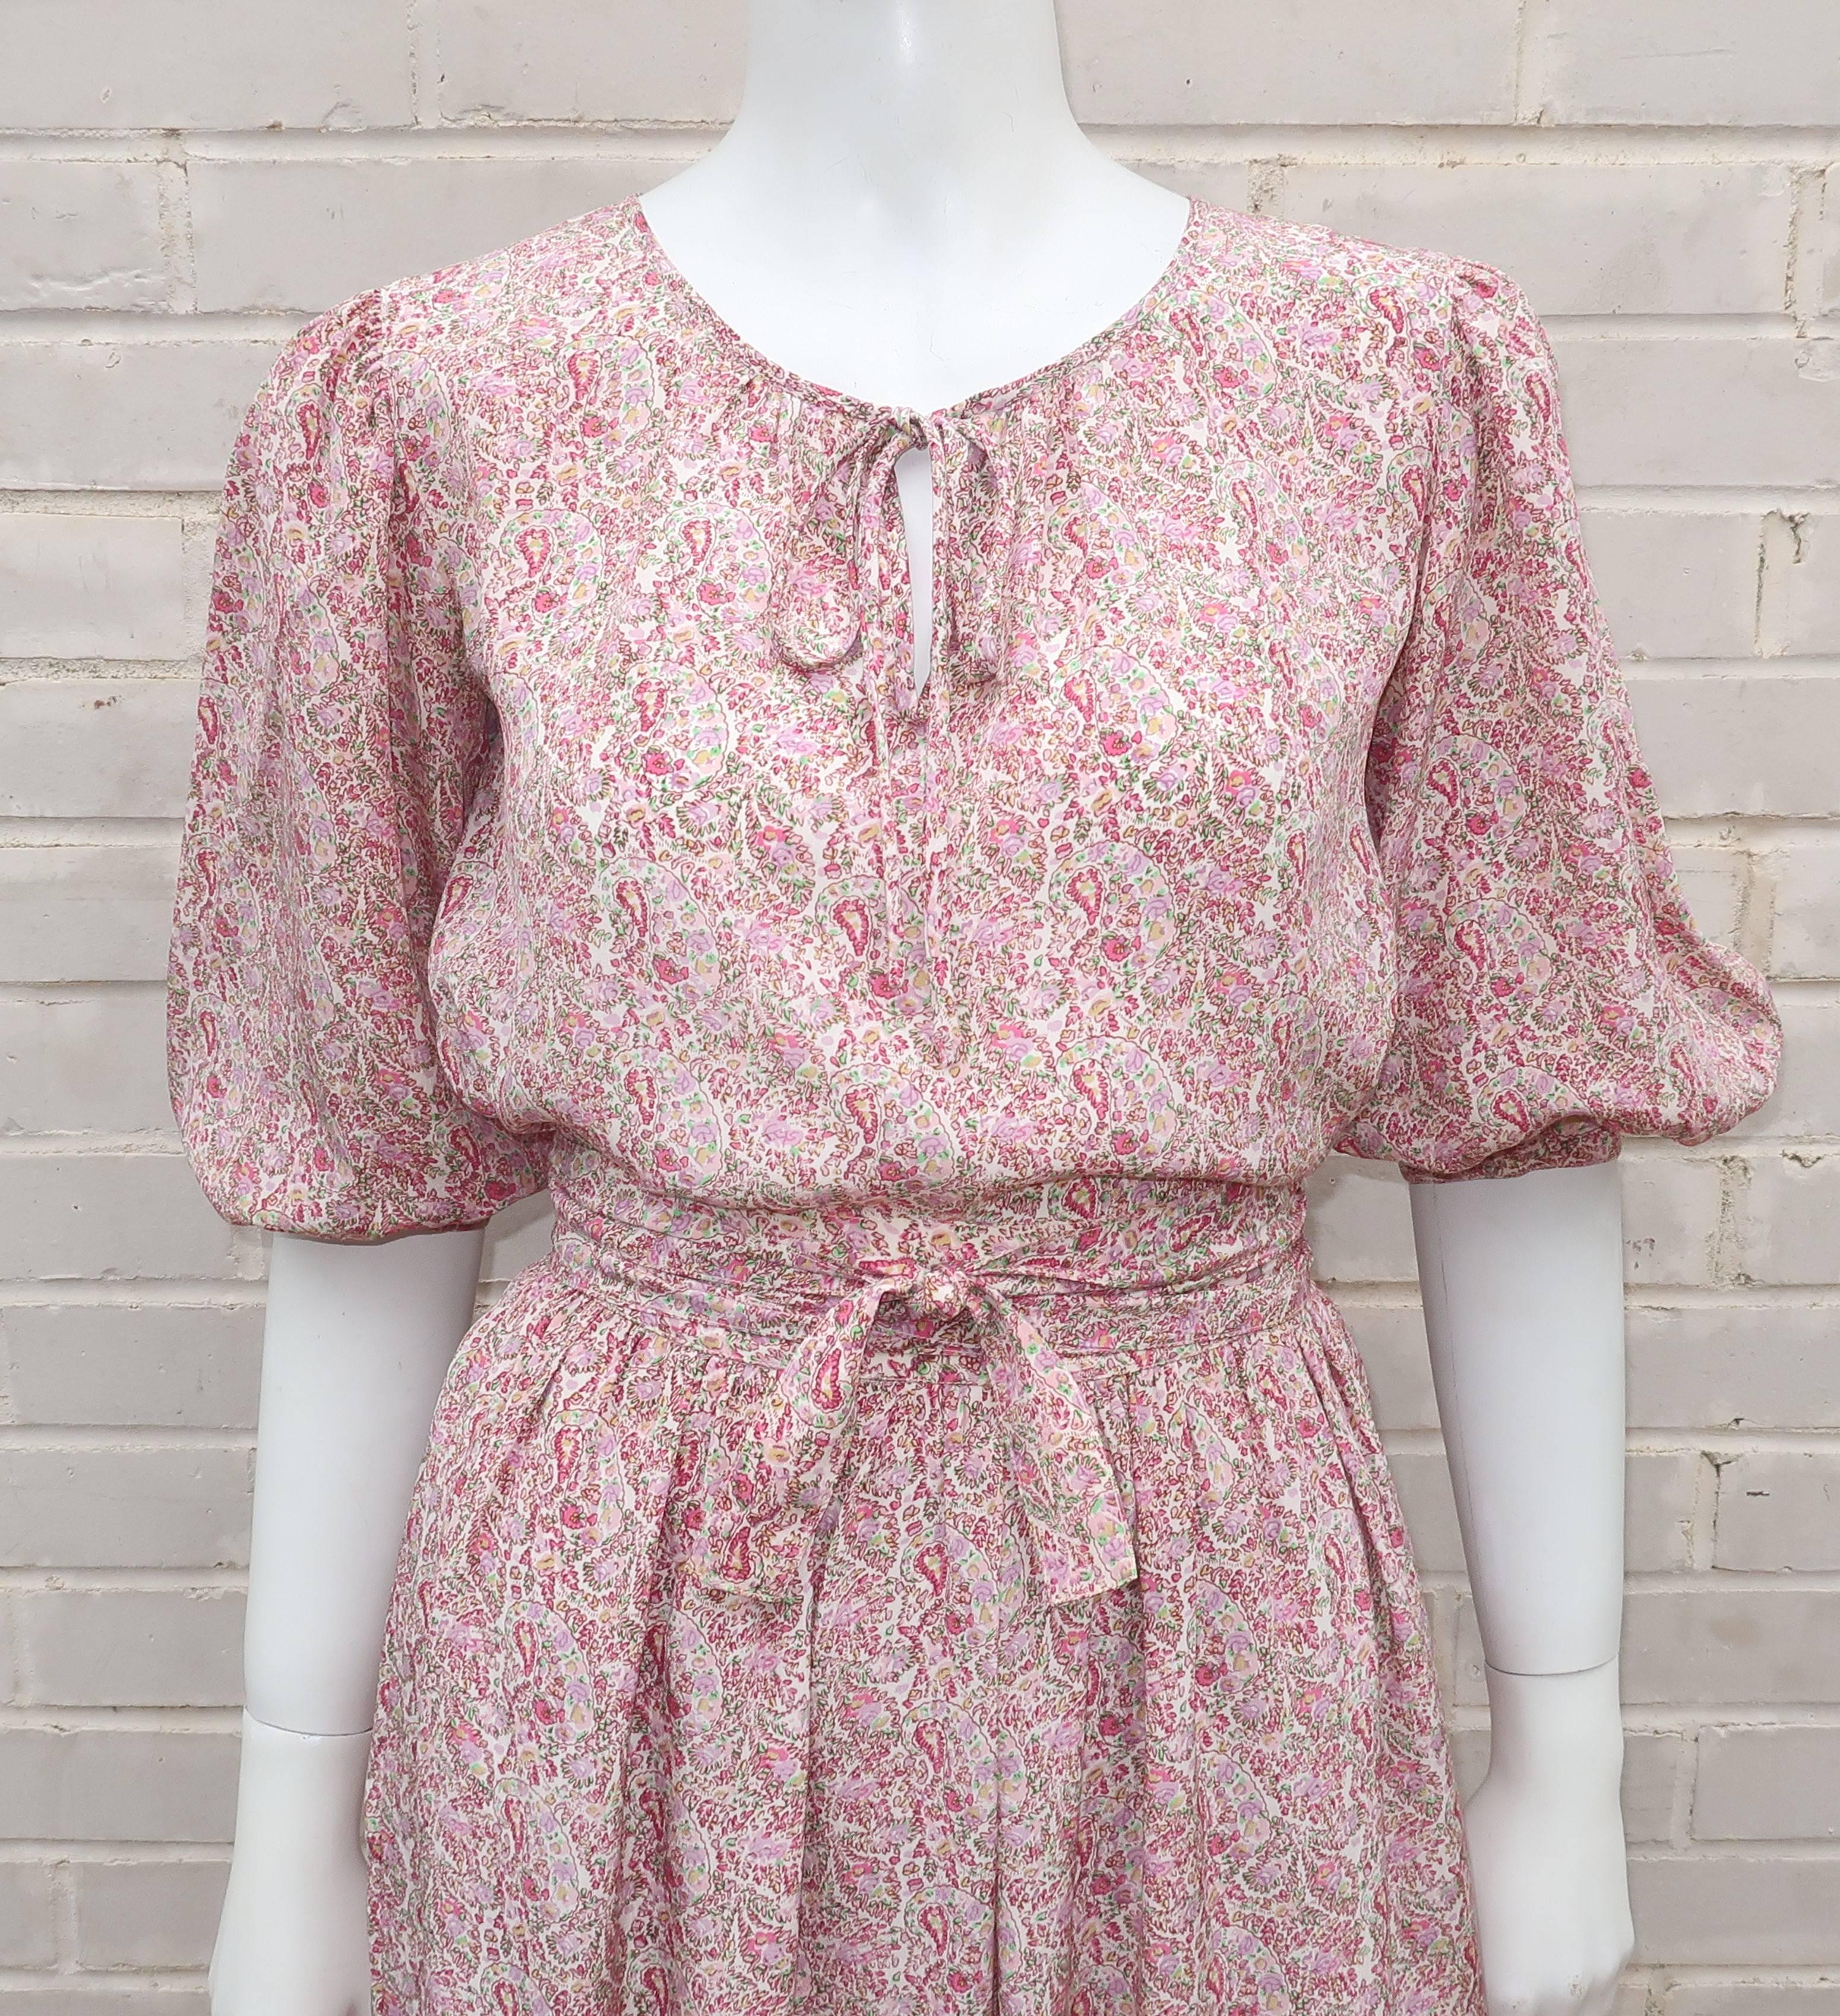 Oscar de La Renta’s knack for creating ultra feminine designs with a touch of the romantic is at play in this lovely two piece silk peasant dress ensemble.  The pullover top ties at the neck with 3/4 balloon sleeves that pool at the button cuff and